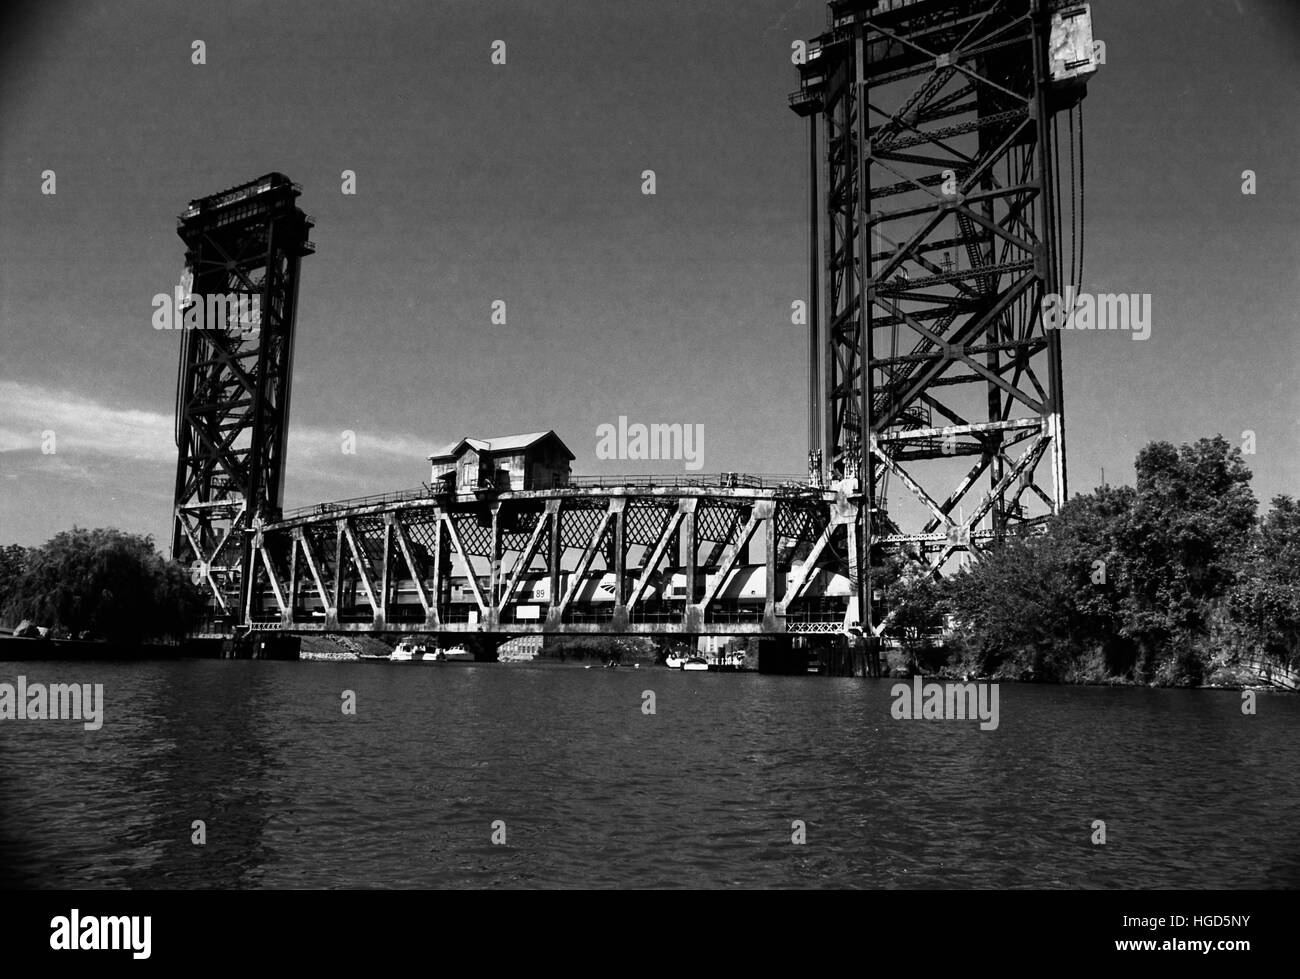 The Amtrak lift bridge over the South Branch of the Chicago River in the Chinatown neighborhood. Stock Photo